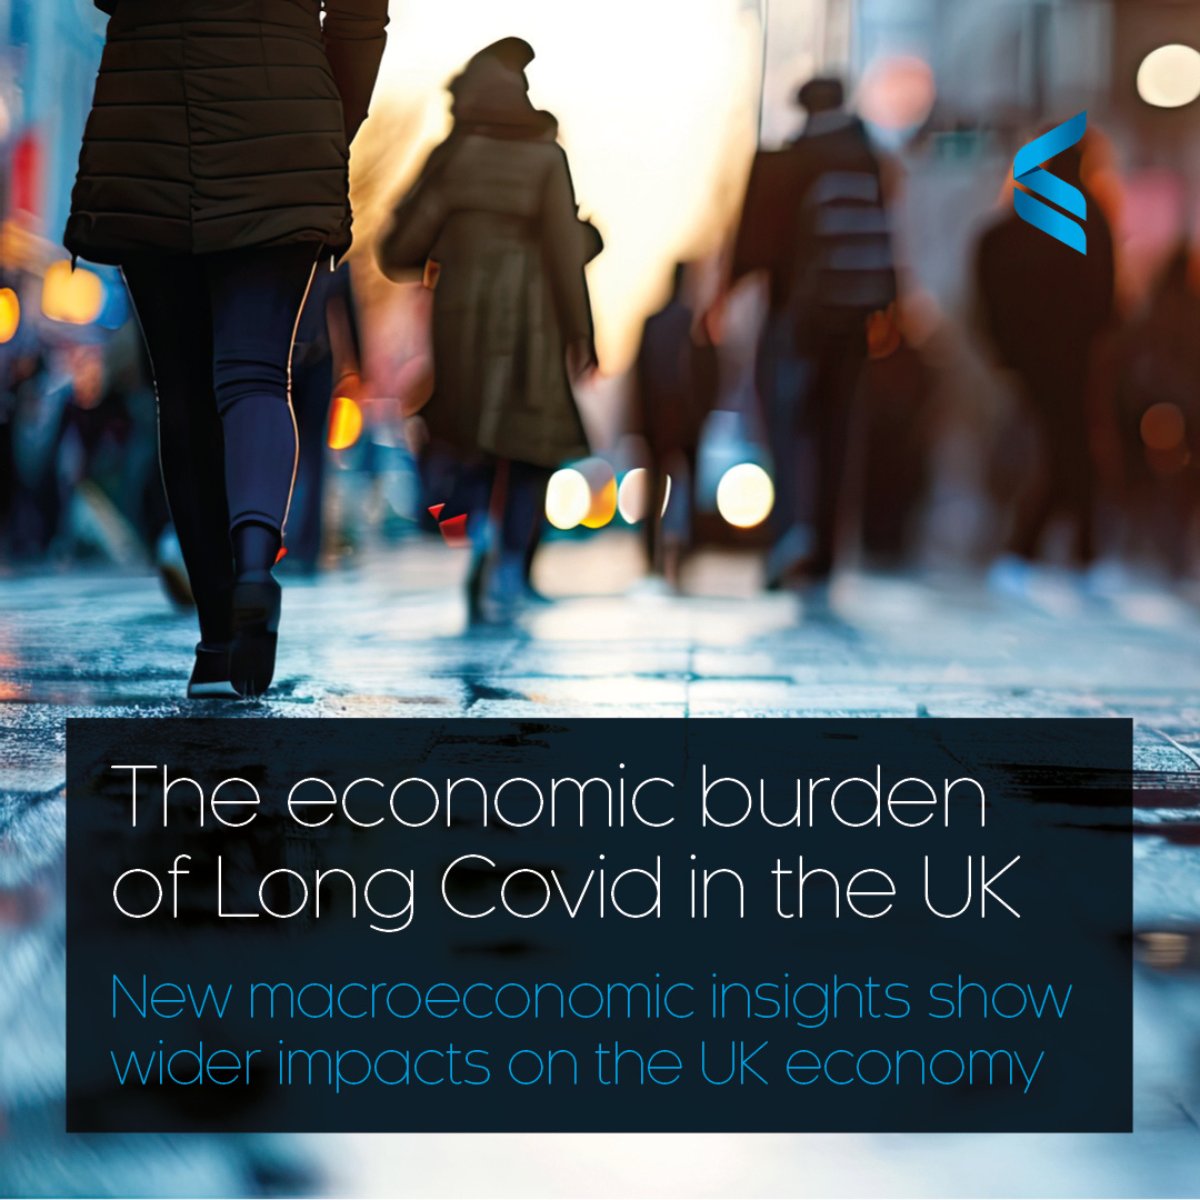 🧵OUT TODAY: New economic analysis reveals Long Covid could be a long-term drag on economic growth and add pressure to already strained NHS 📊🔍 1/8 Find out more here: bit.ly/3PtysTs #LongCovidAwareness #LongCovid #PublicHealth #EconomicInactivity